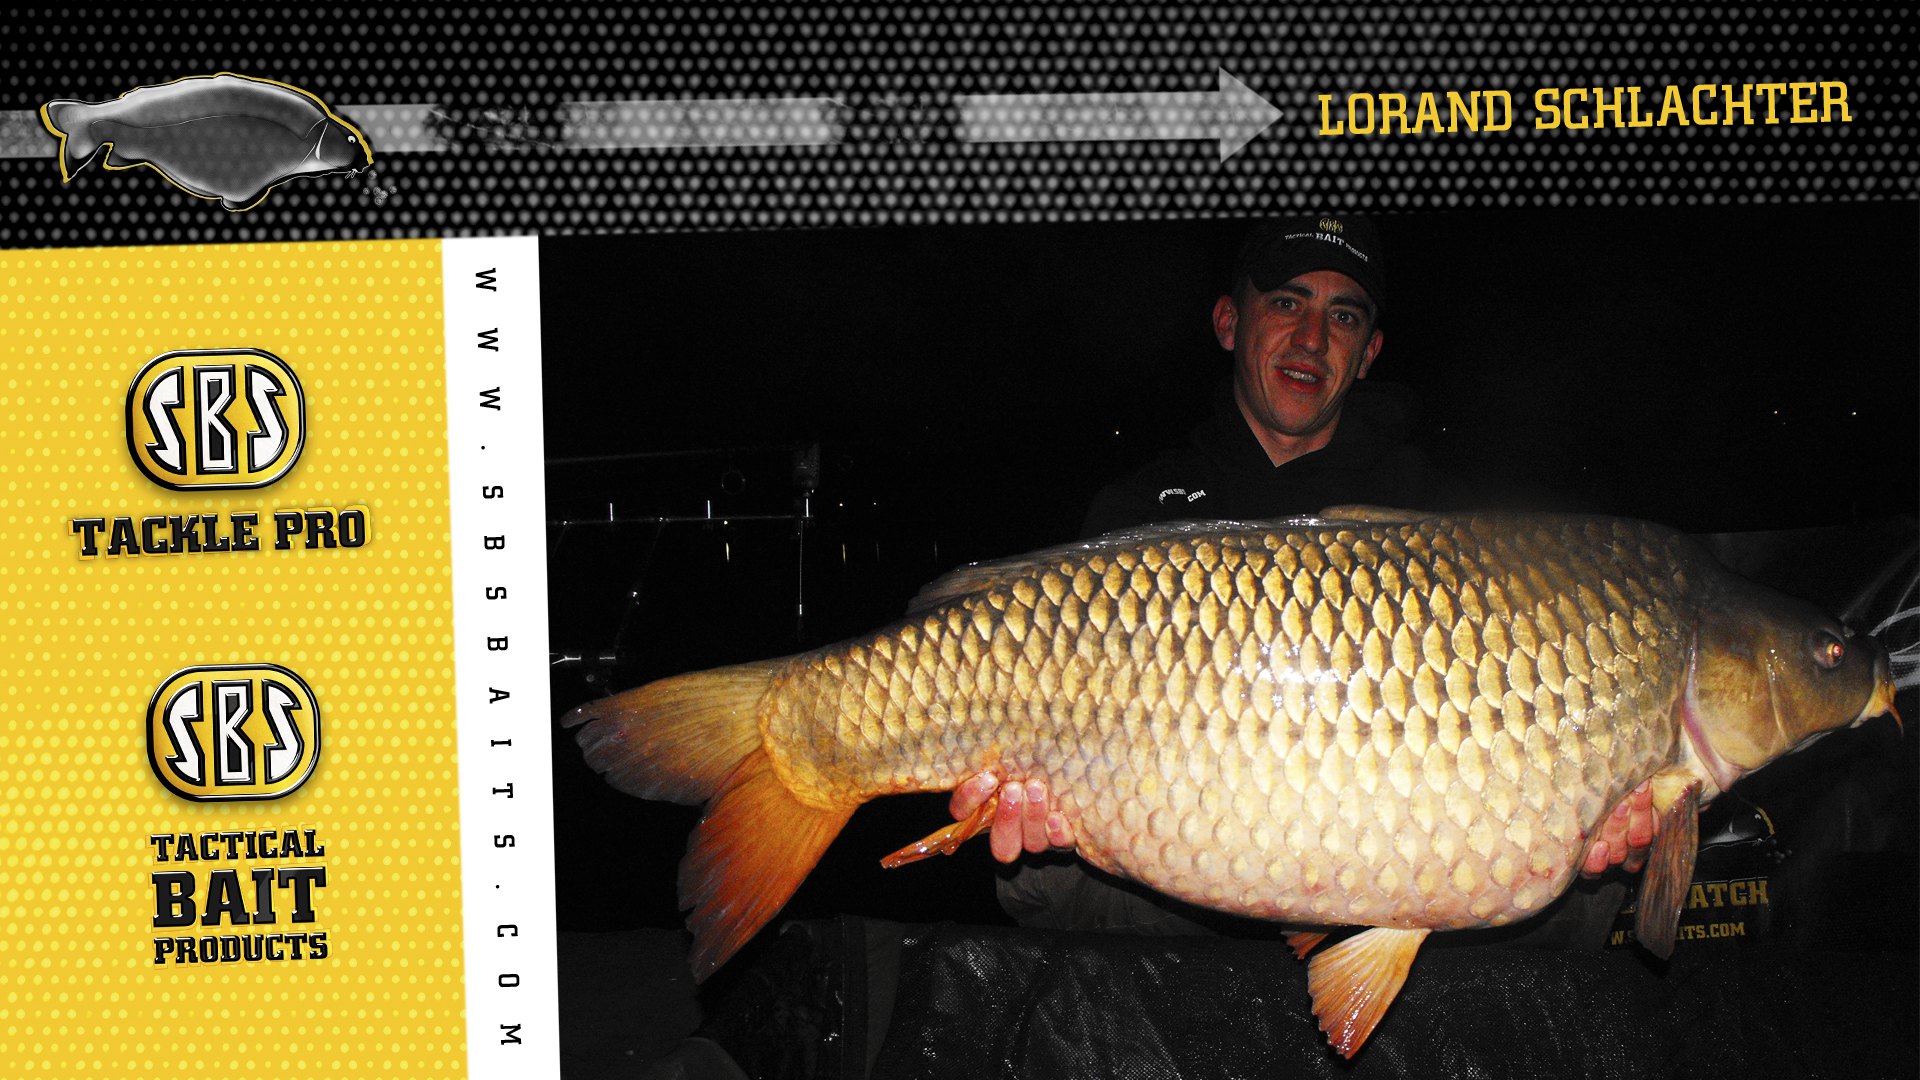 Lóri was also on fire, new PB for him as well: 22,40 kg